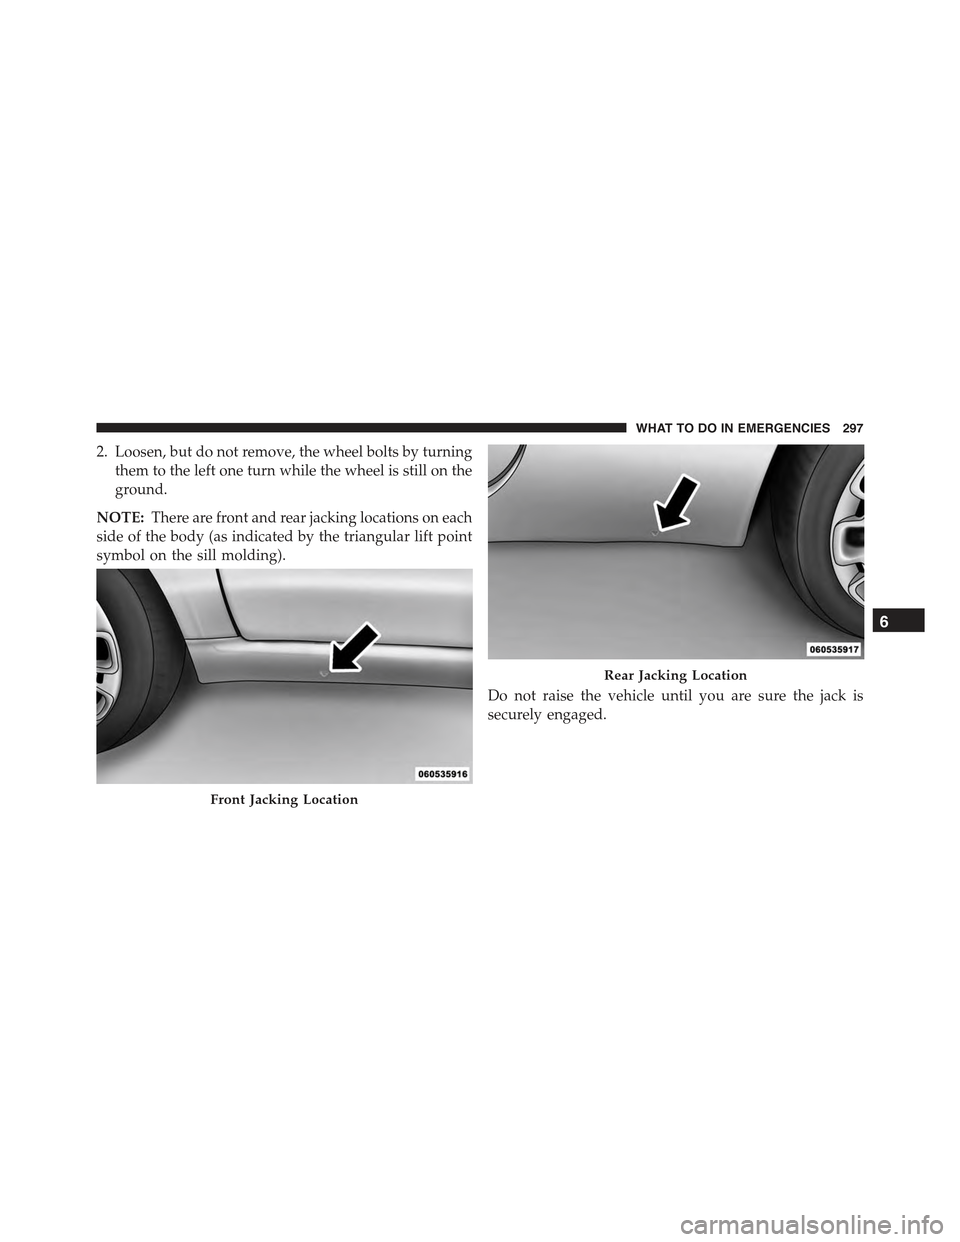 FIAT 500 ABARTH 2013 2.G Owners Manual 2. Loosen, but do not remove, the wheel bolts by turning
them to the left one turn while the wheel is still on the
ground.
NOTE:There are front and rear jacking locations on each
side of the body (as 